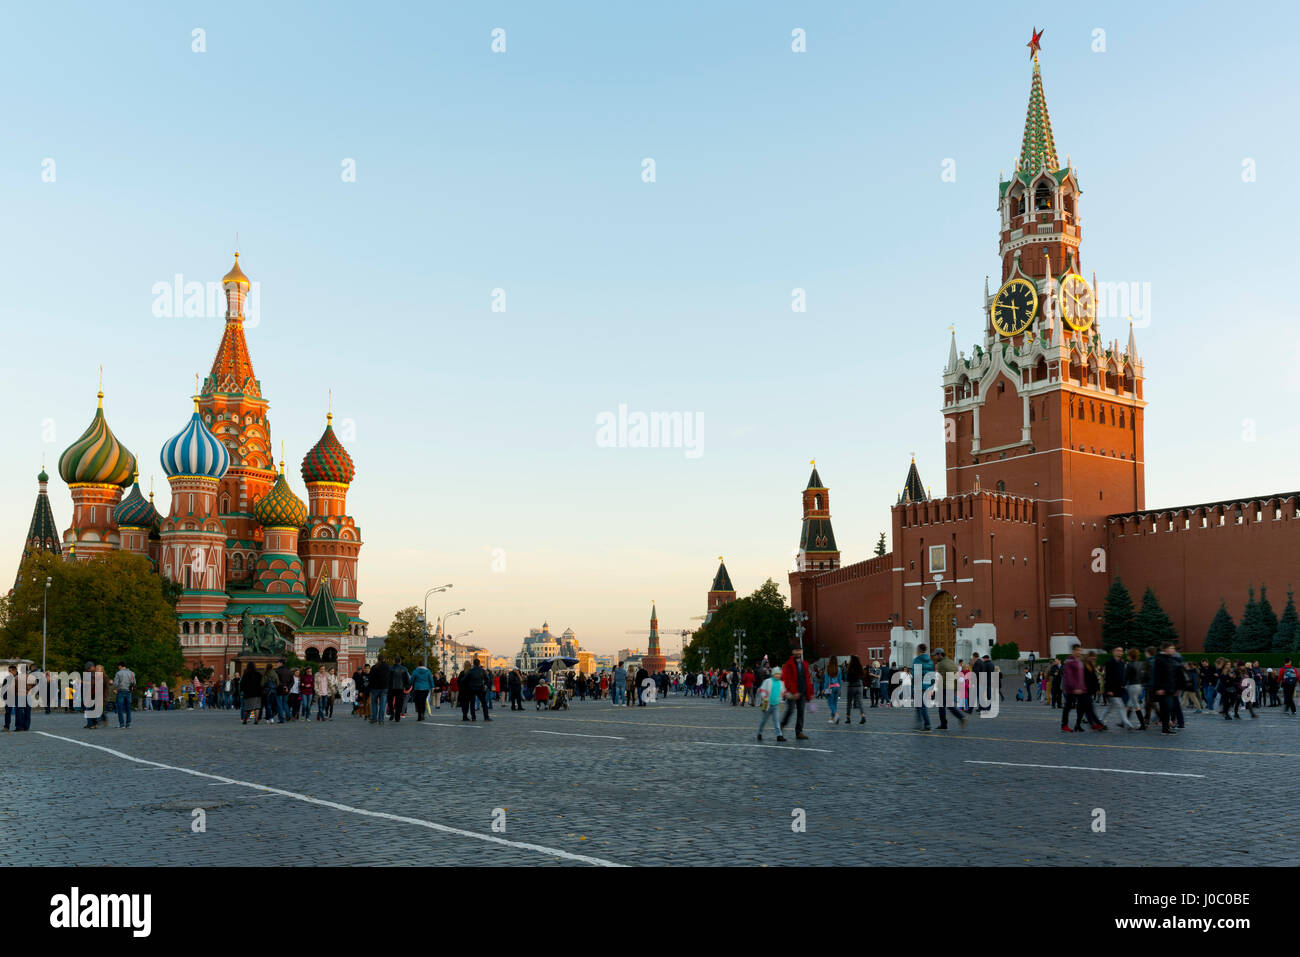 Red Square, St. Basil's Cathedral and the Savior's Tower of the Kremlin, UNESCO World Heritage Site, Moscow, Russia Stock Photo